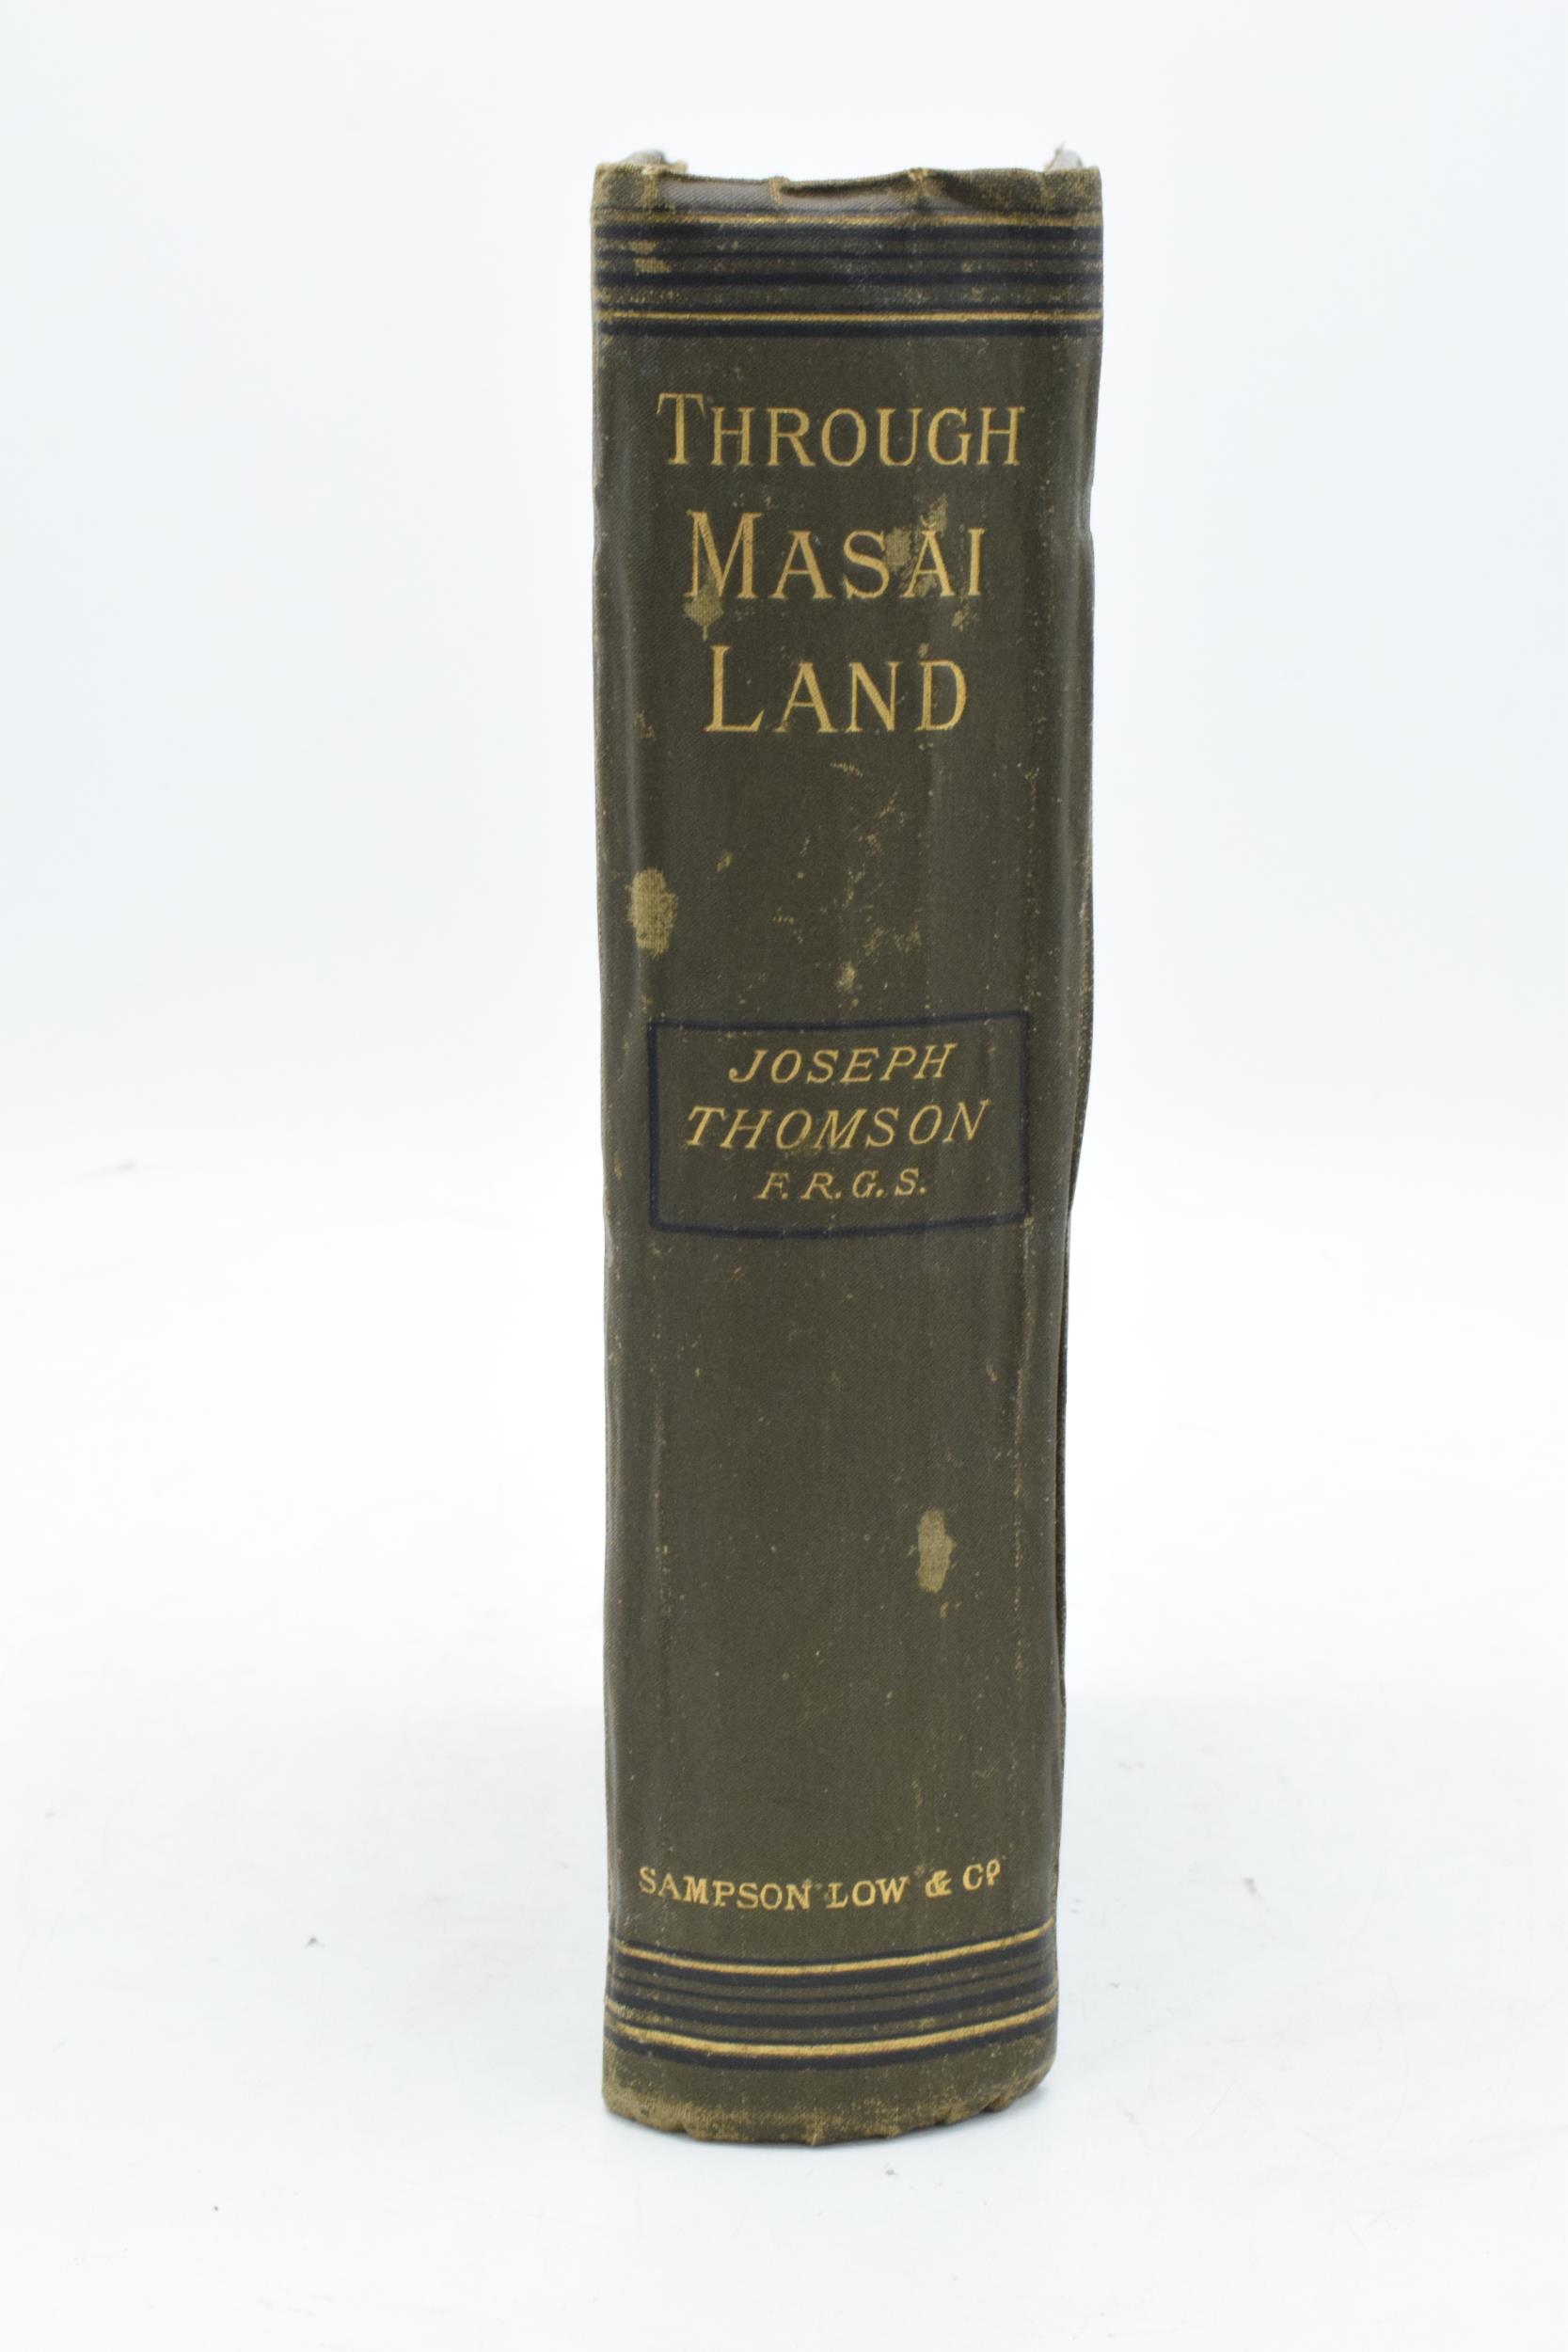 Hardback book: 'Through Masai Lane' by Joseph Thomson FRGS. 2nd edition 1885 with tissue guard to - Image 3 of 16